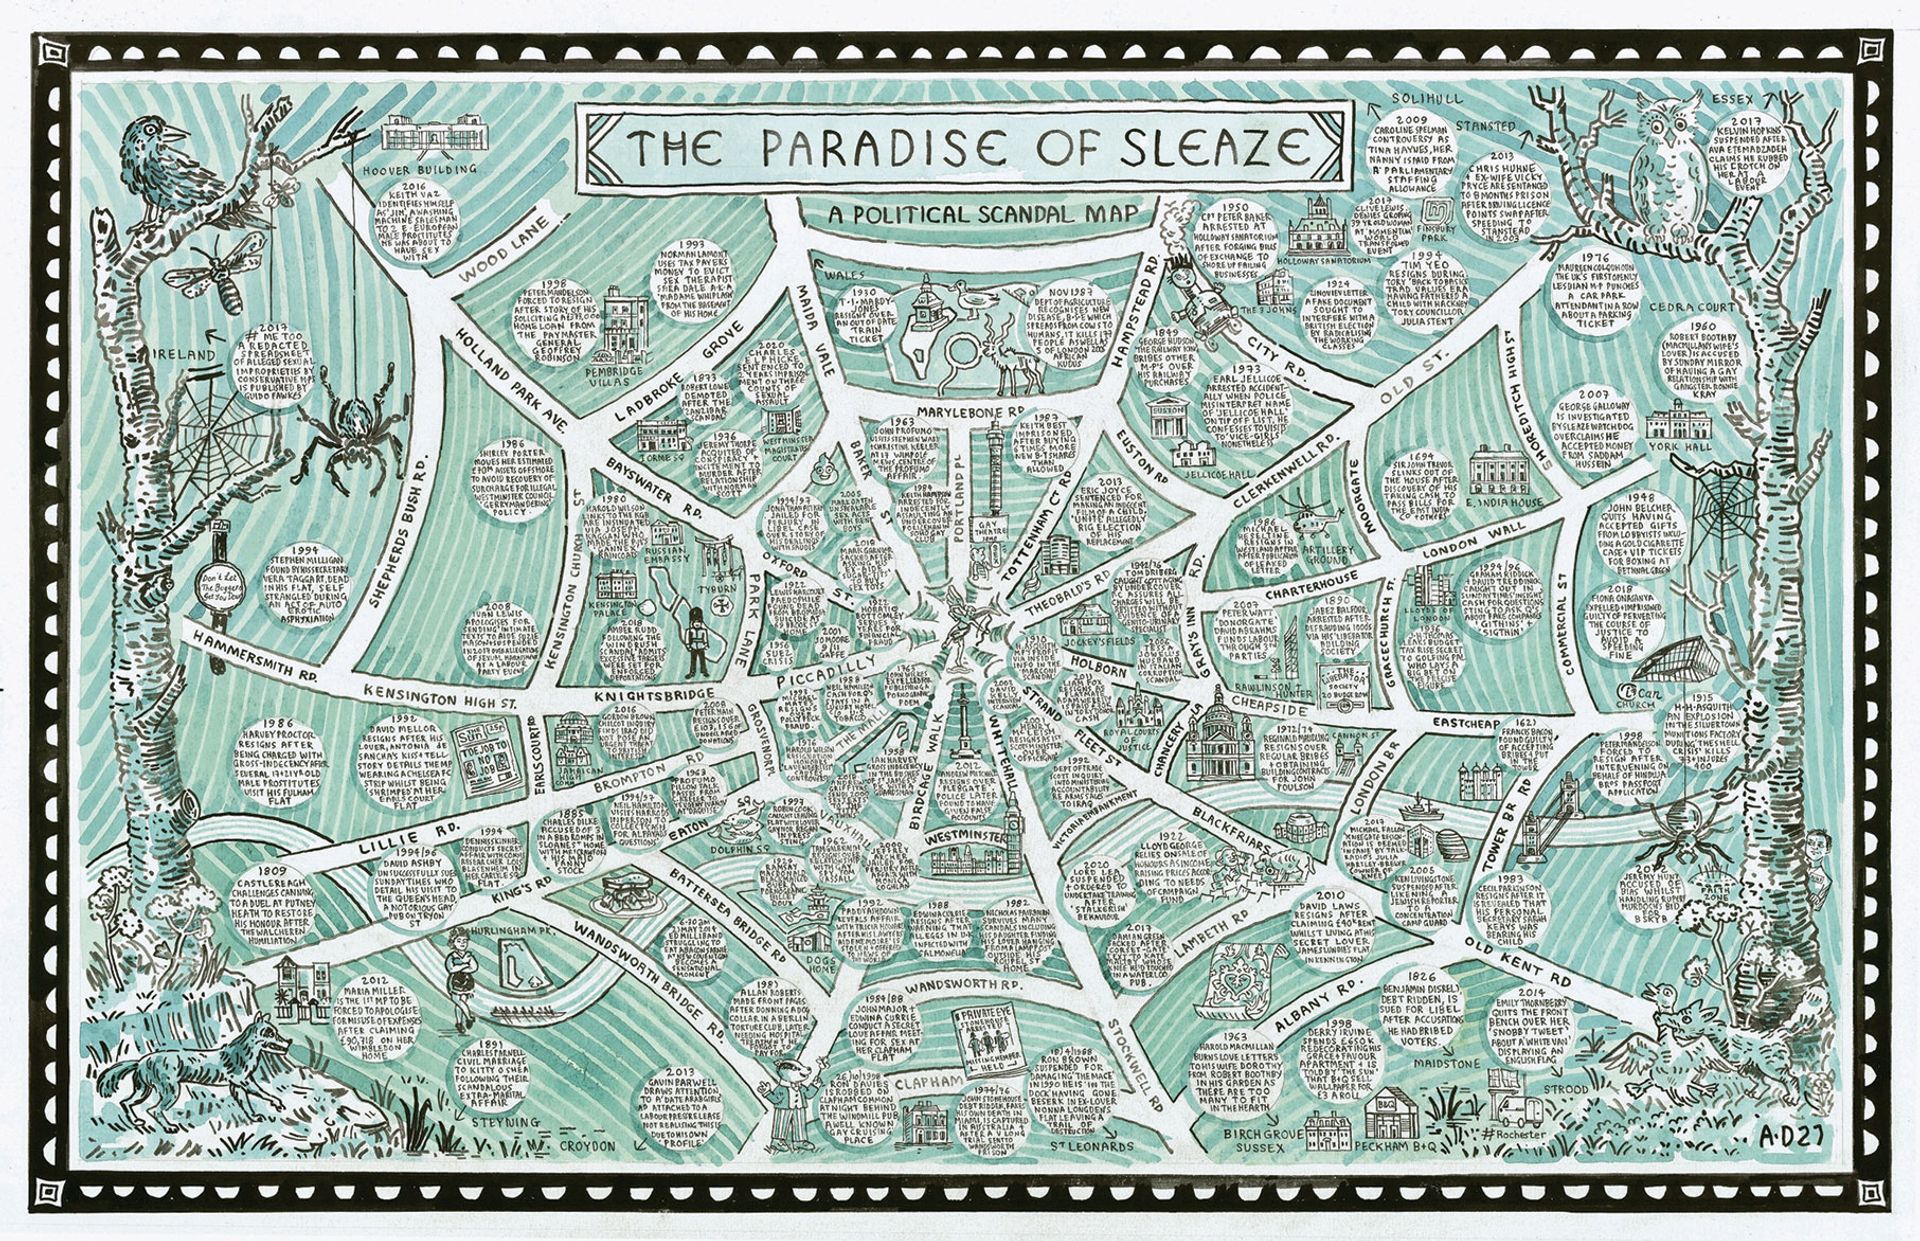 The Paradise of Sleaze by Adam Dant offers an extensive catalogue of London’s political scandals across the centuries

© Adam Dant

